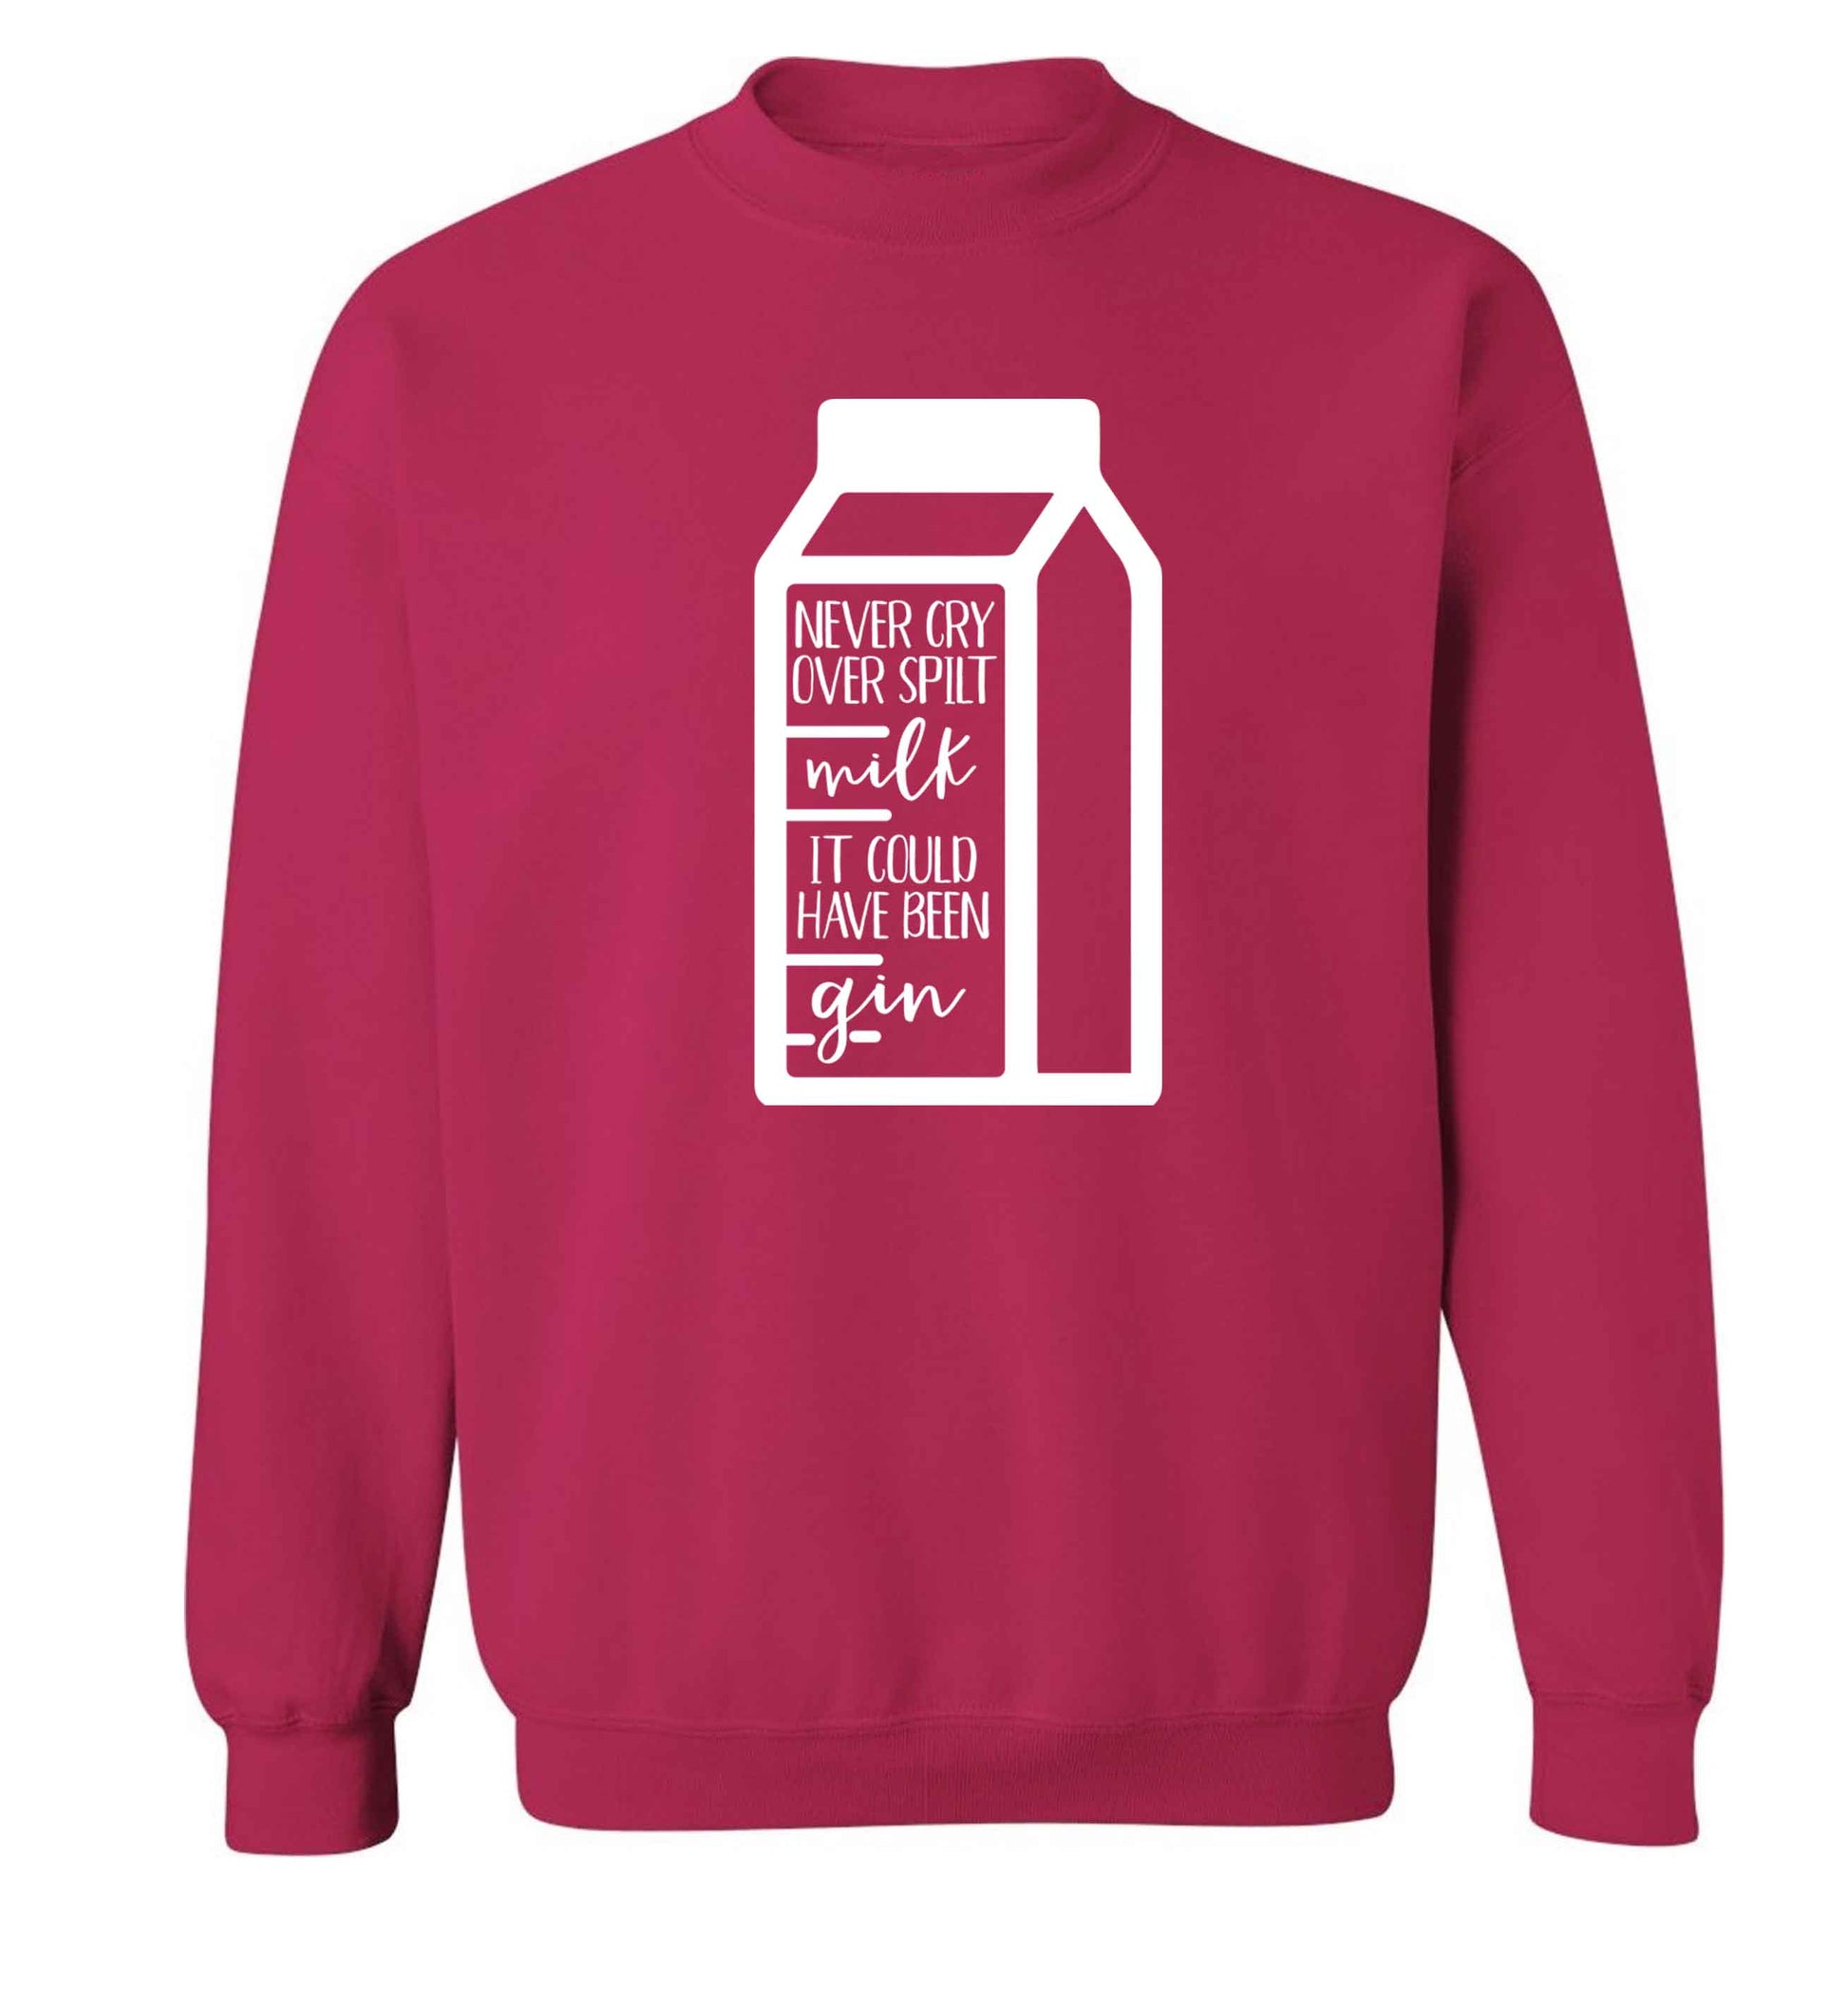 Never cry over spilt milk, it could have been gin Adult's unisex pink Sweater 2XL